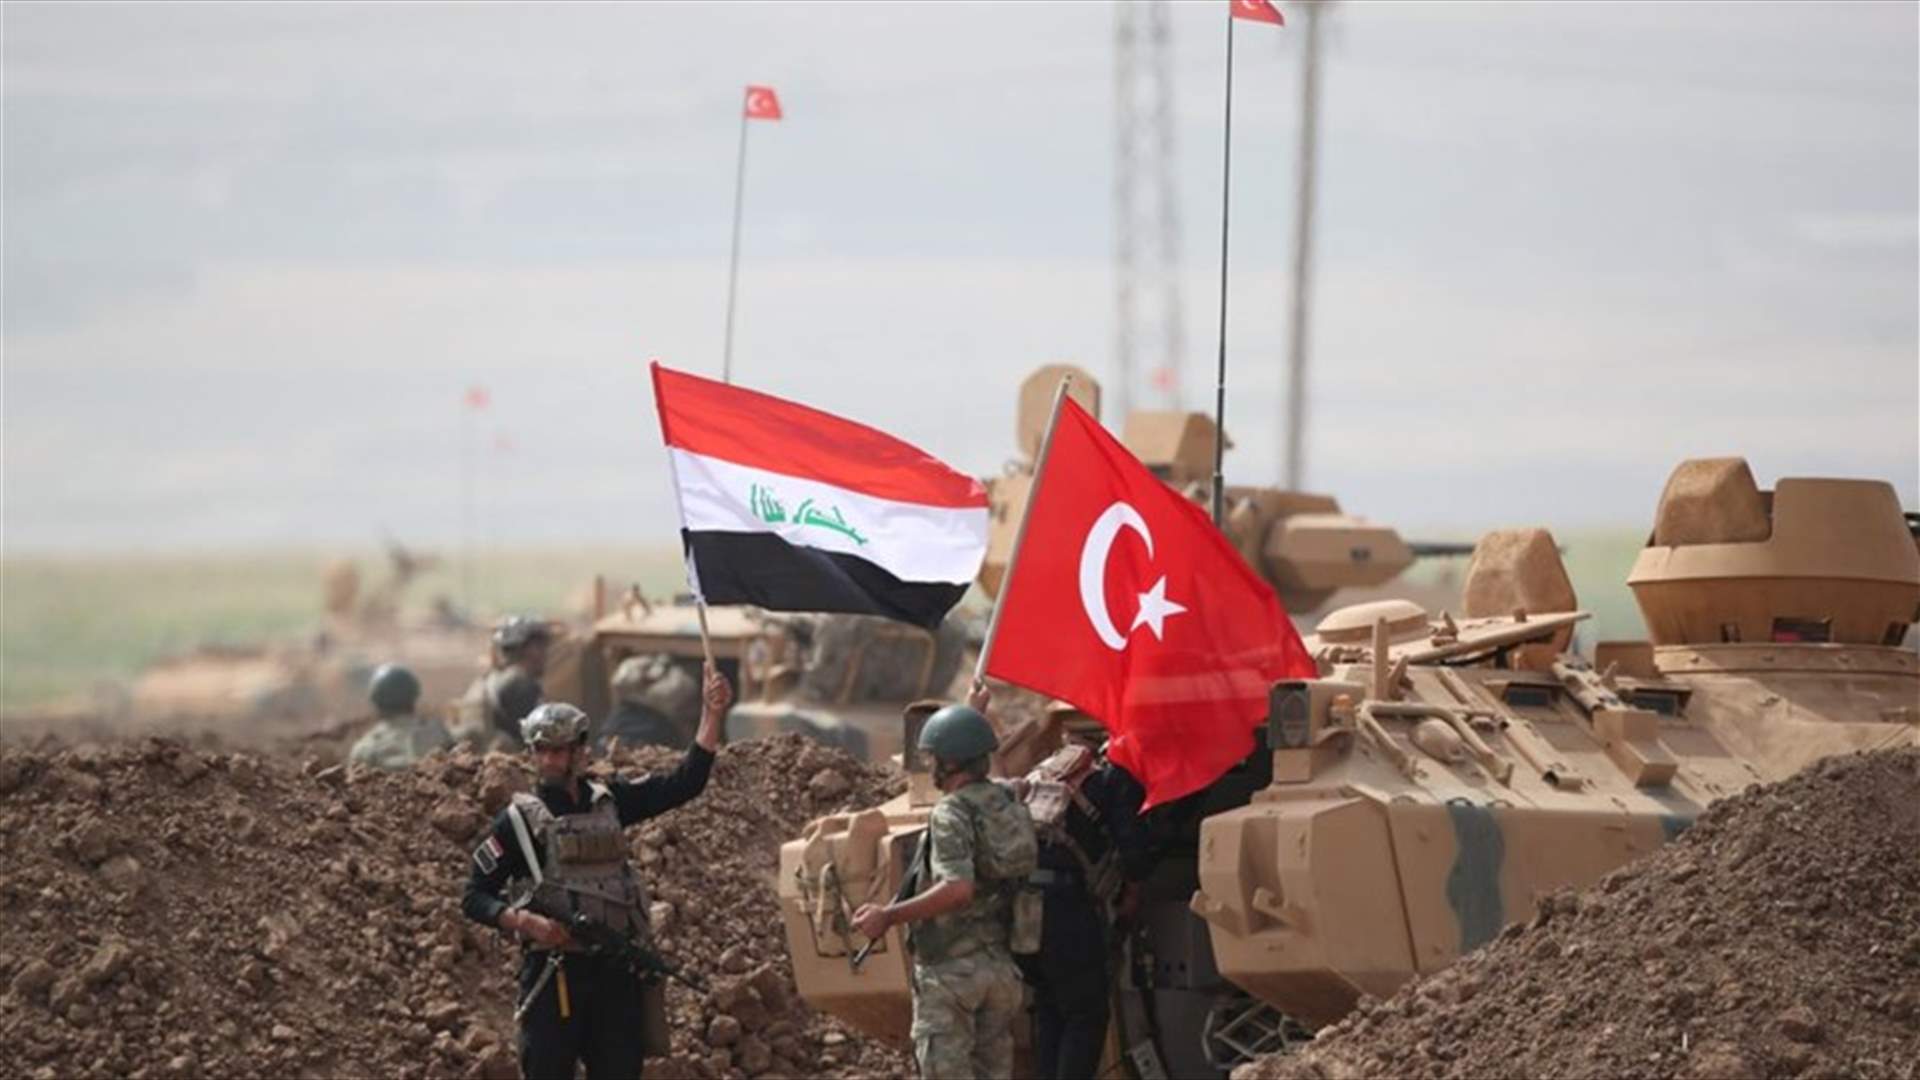 Iraqi soldiers join Turkish exercises near shared border - witness